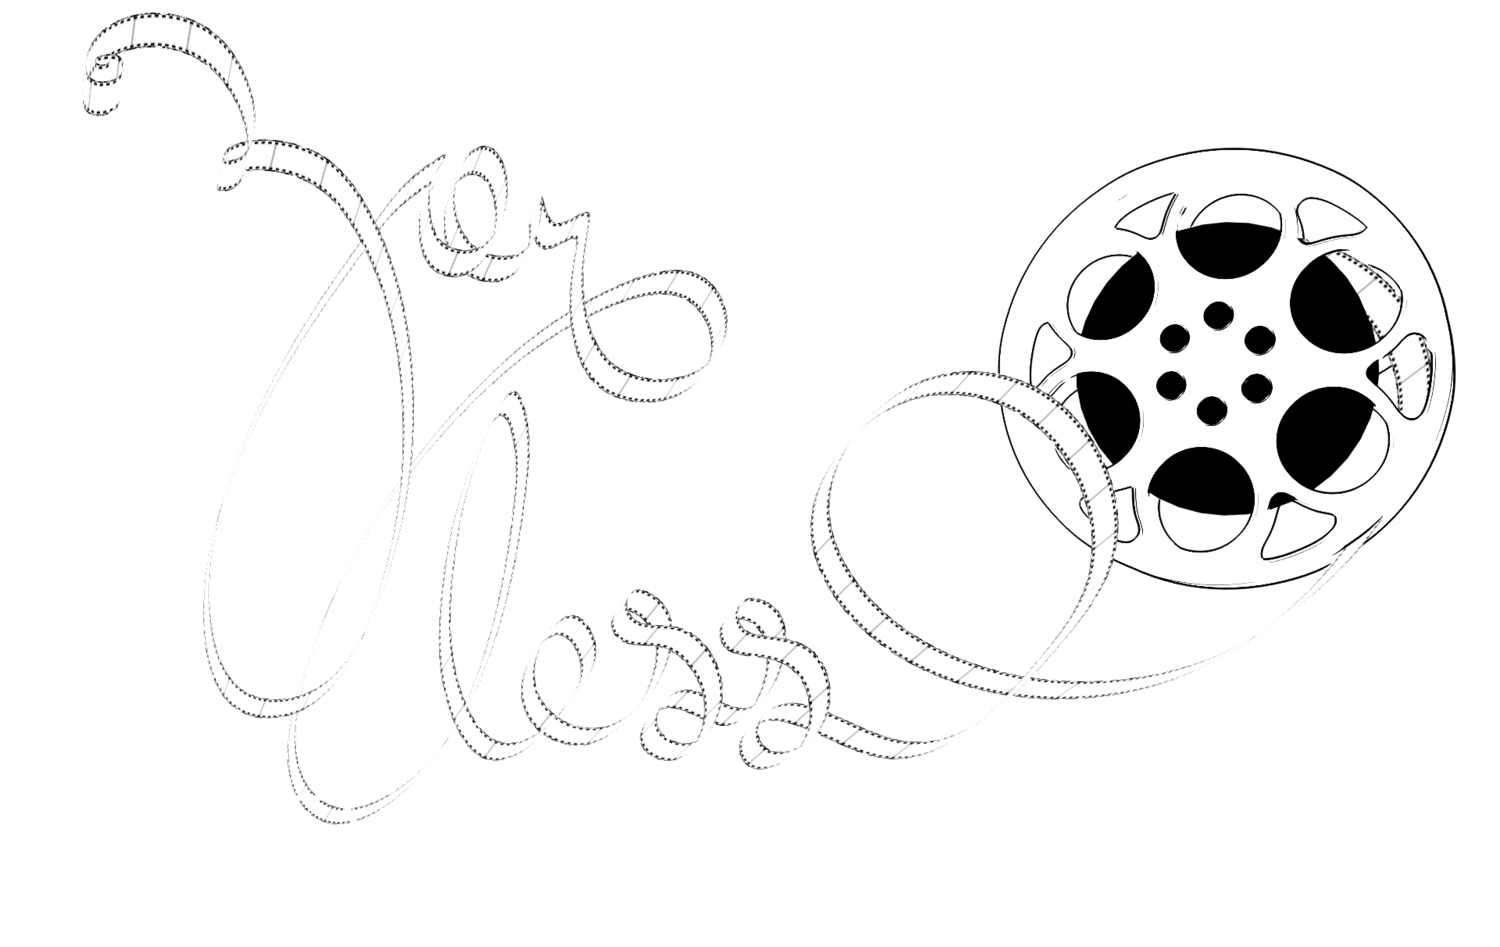 3 Or Less Productions